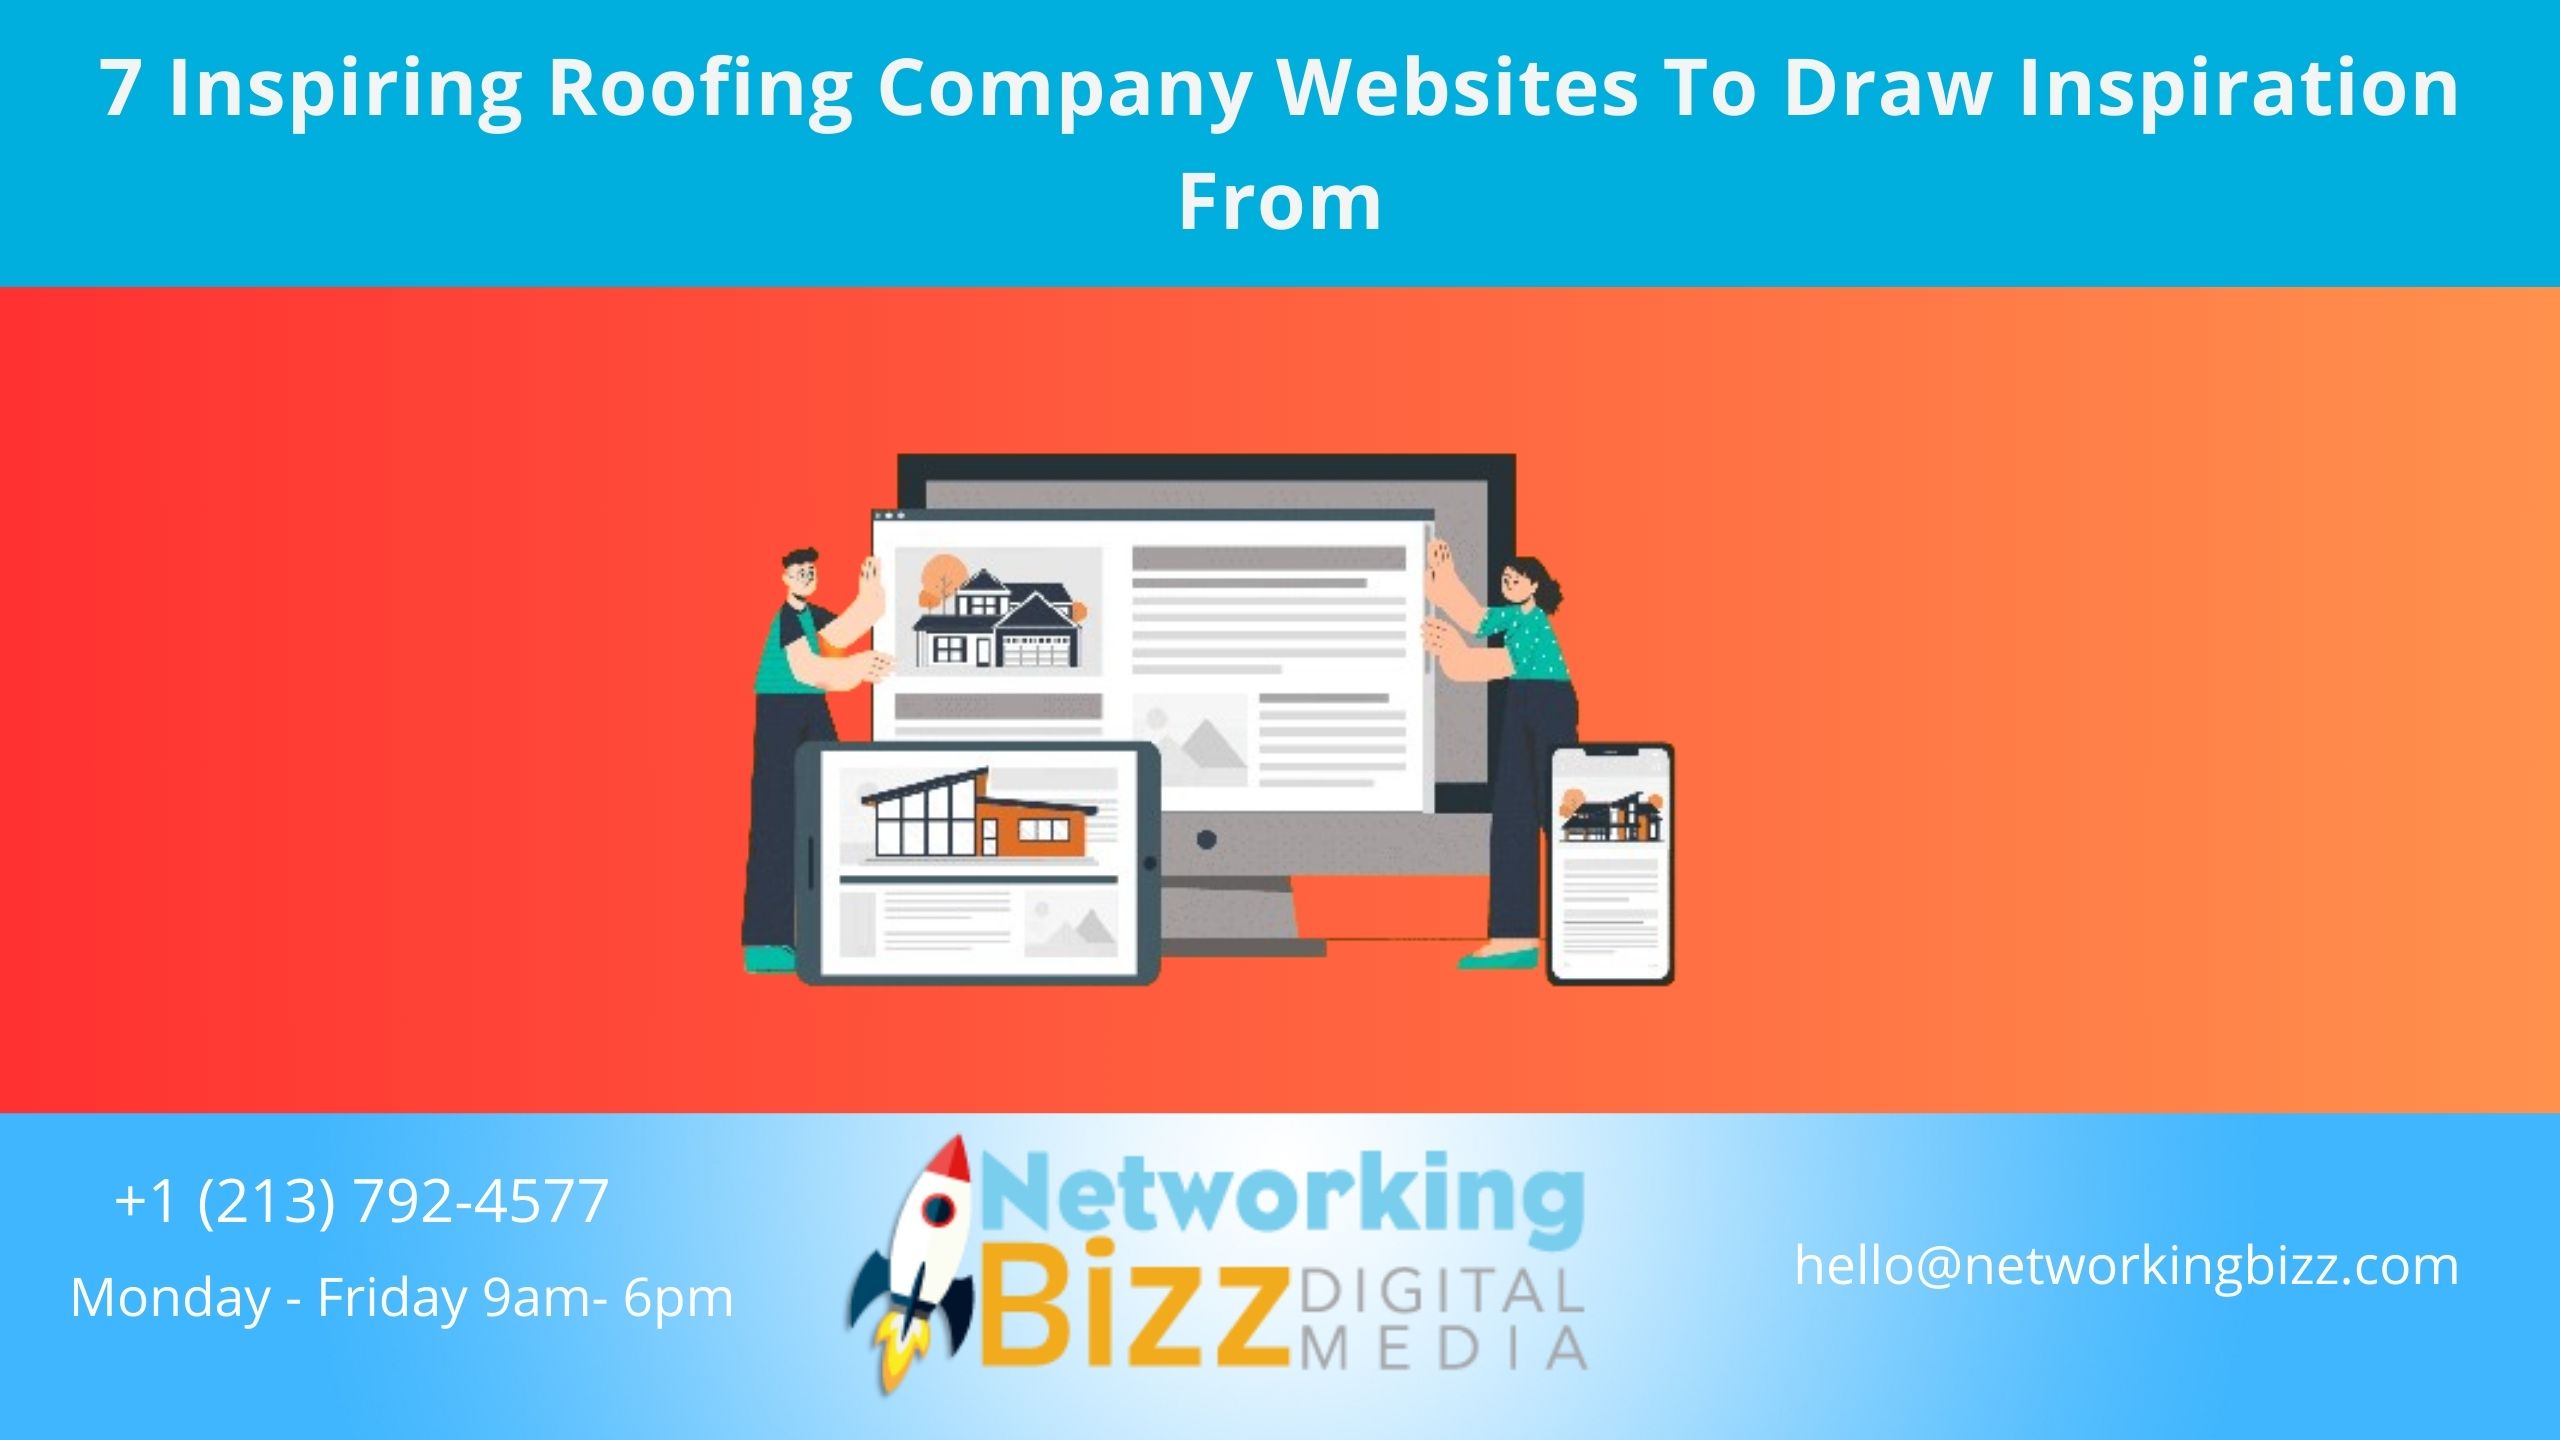 7 Inspiring Roofing Company Websites To Draw Inspiration From